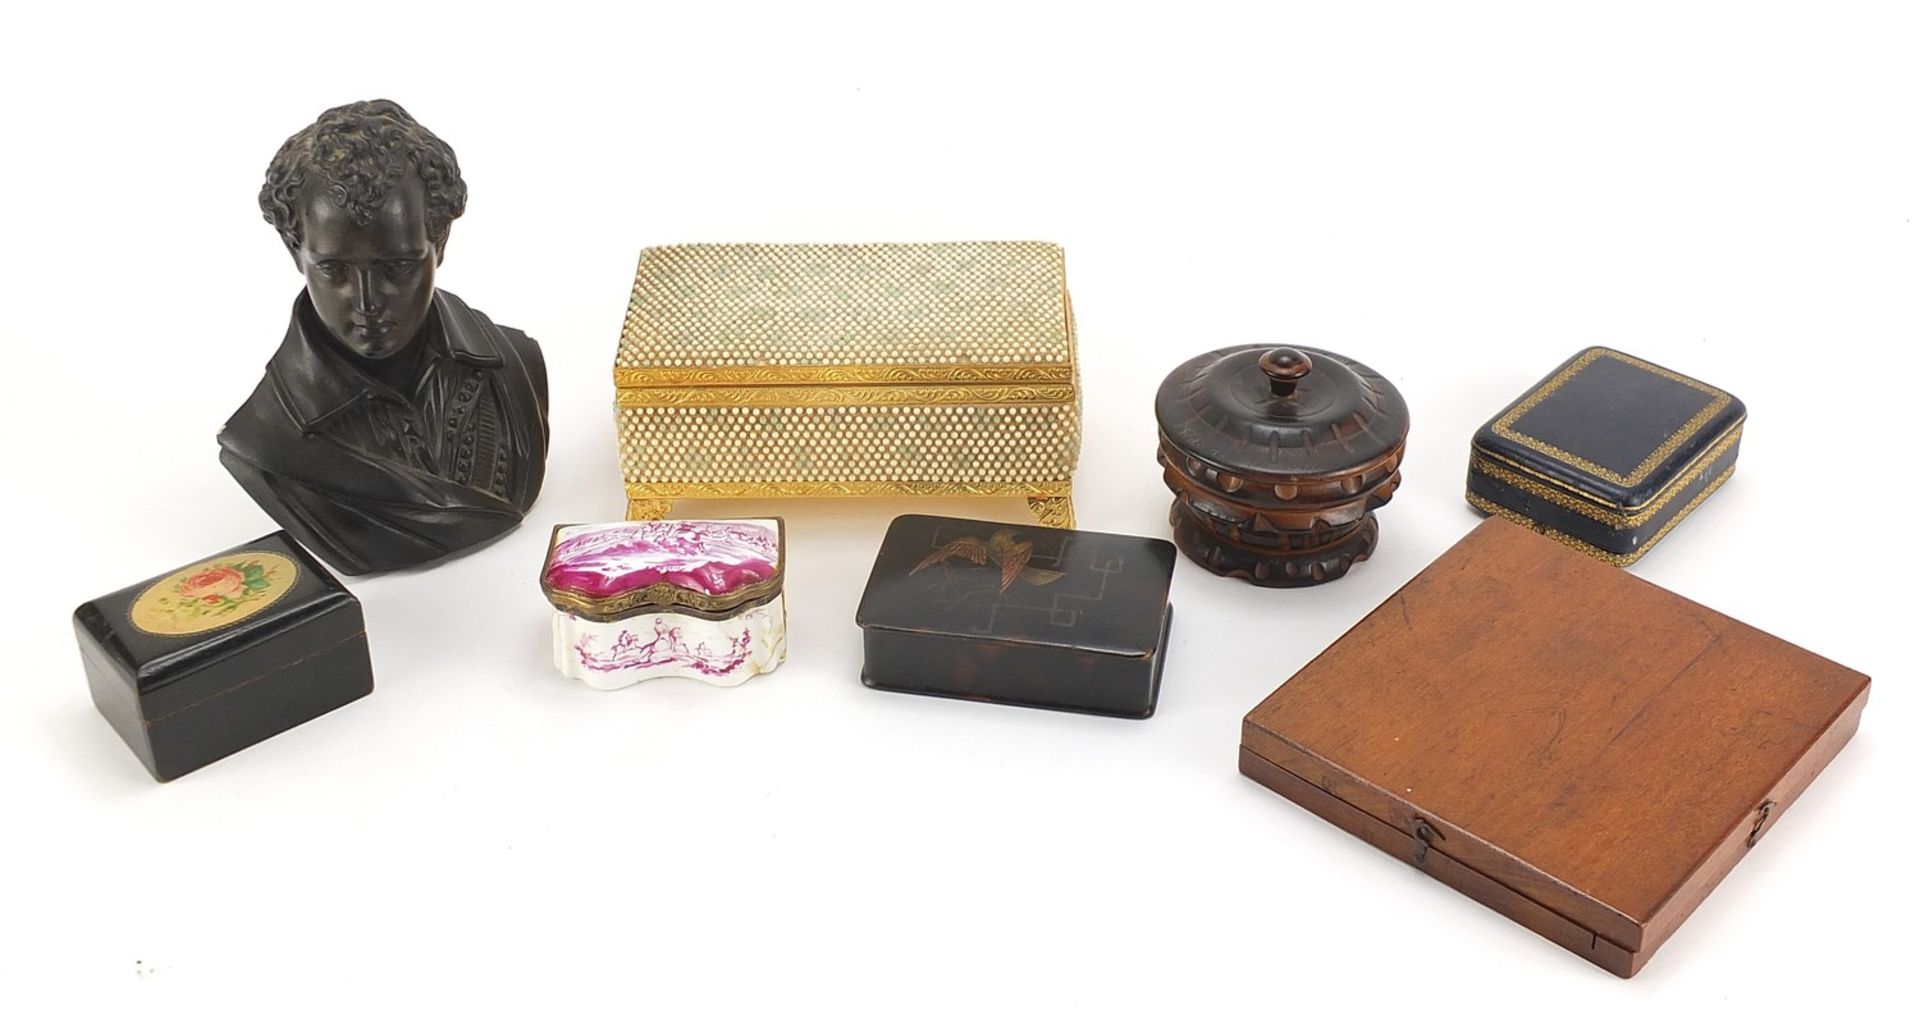 19th century and later objects including a snuff box hand painted with a battle scene, musical